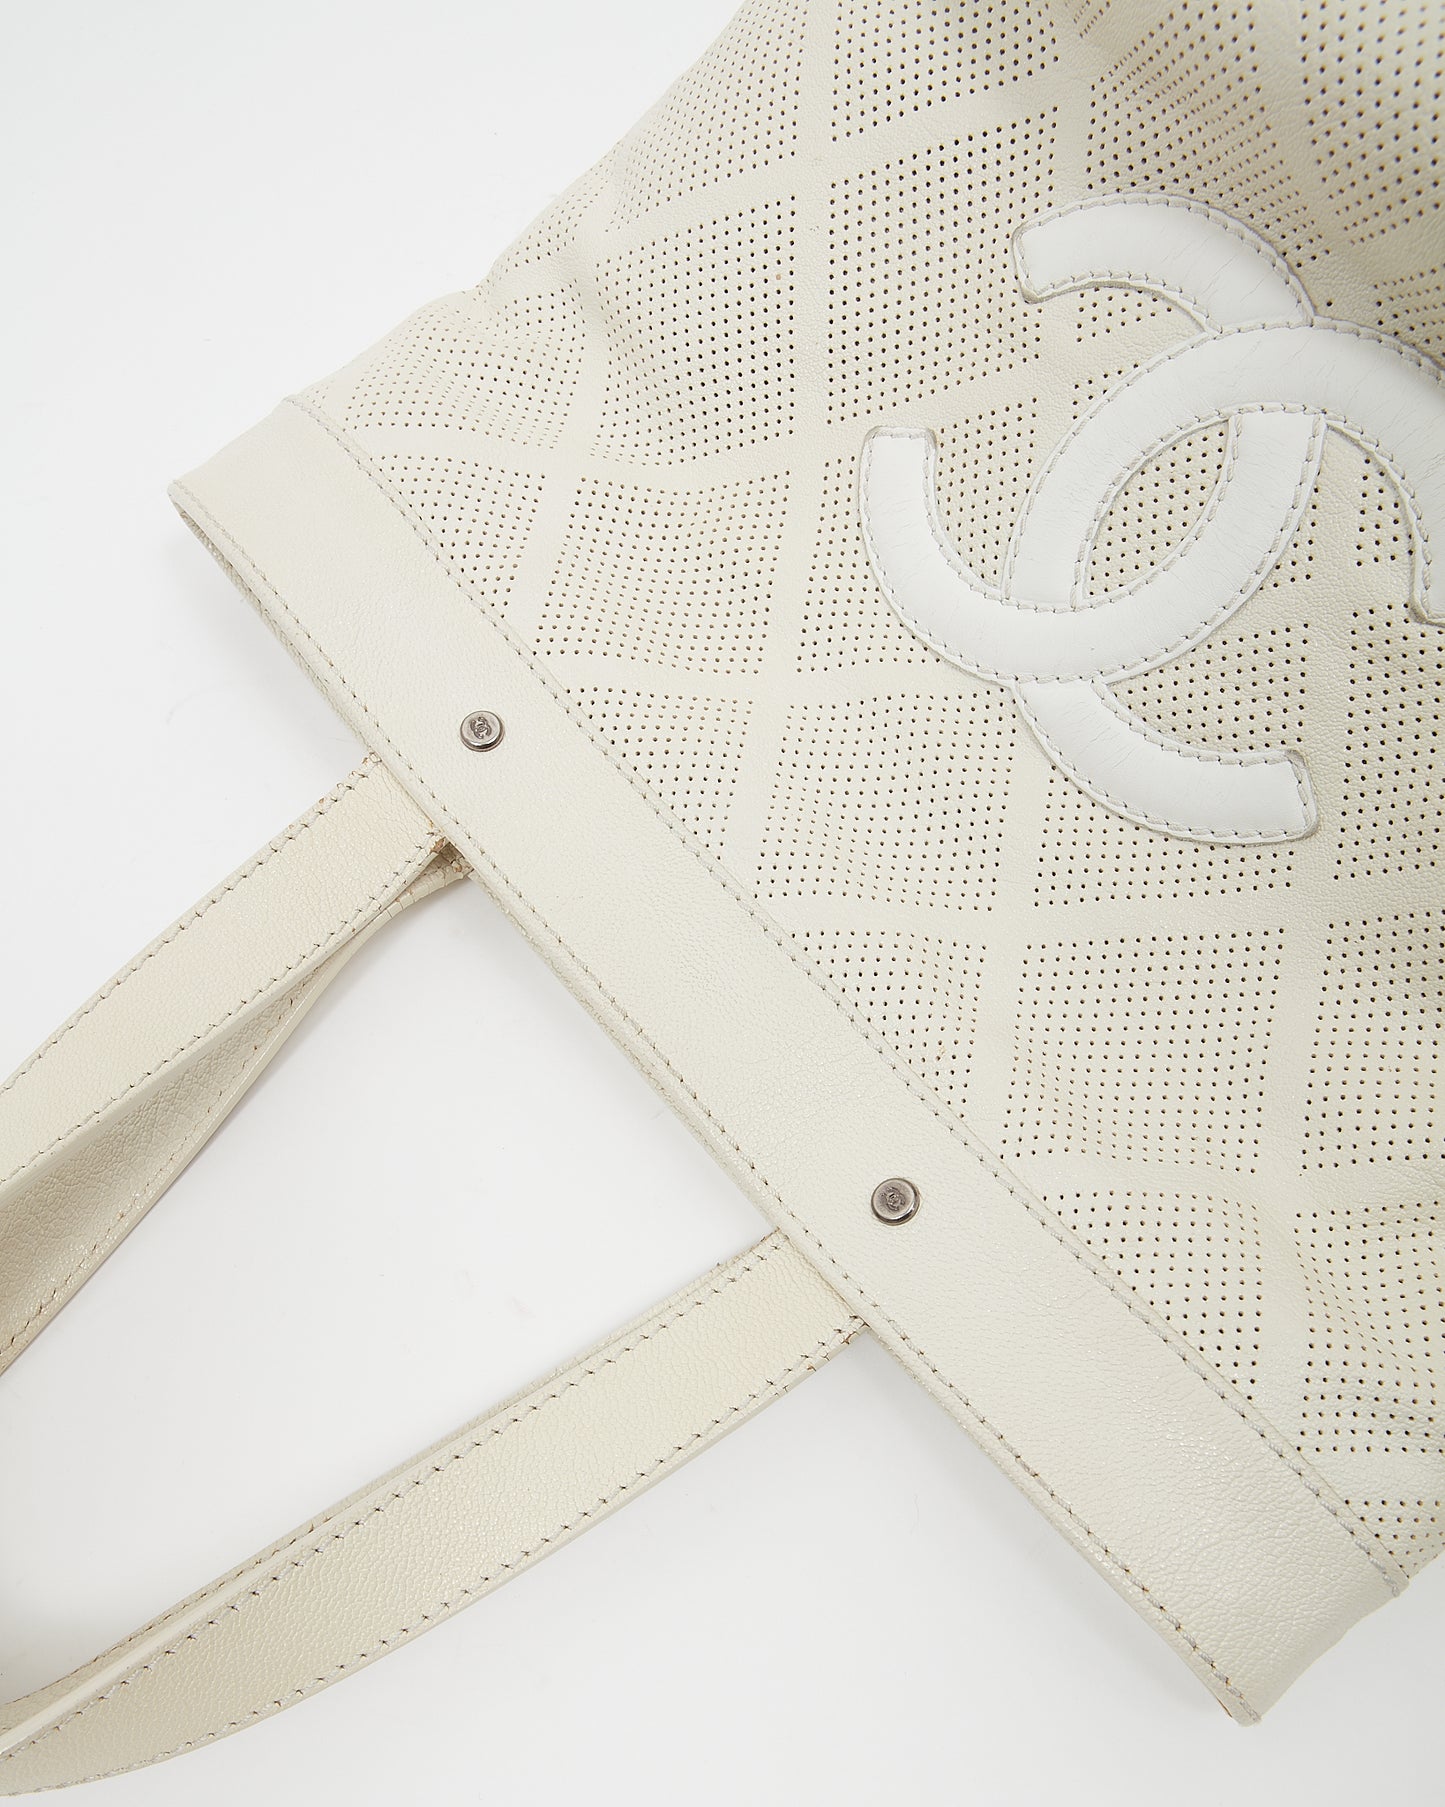 Chanel White Leather CC Perforated Tote Bag